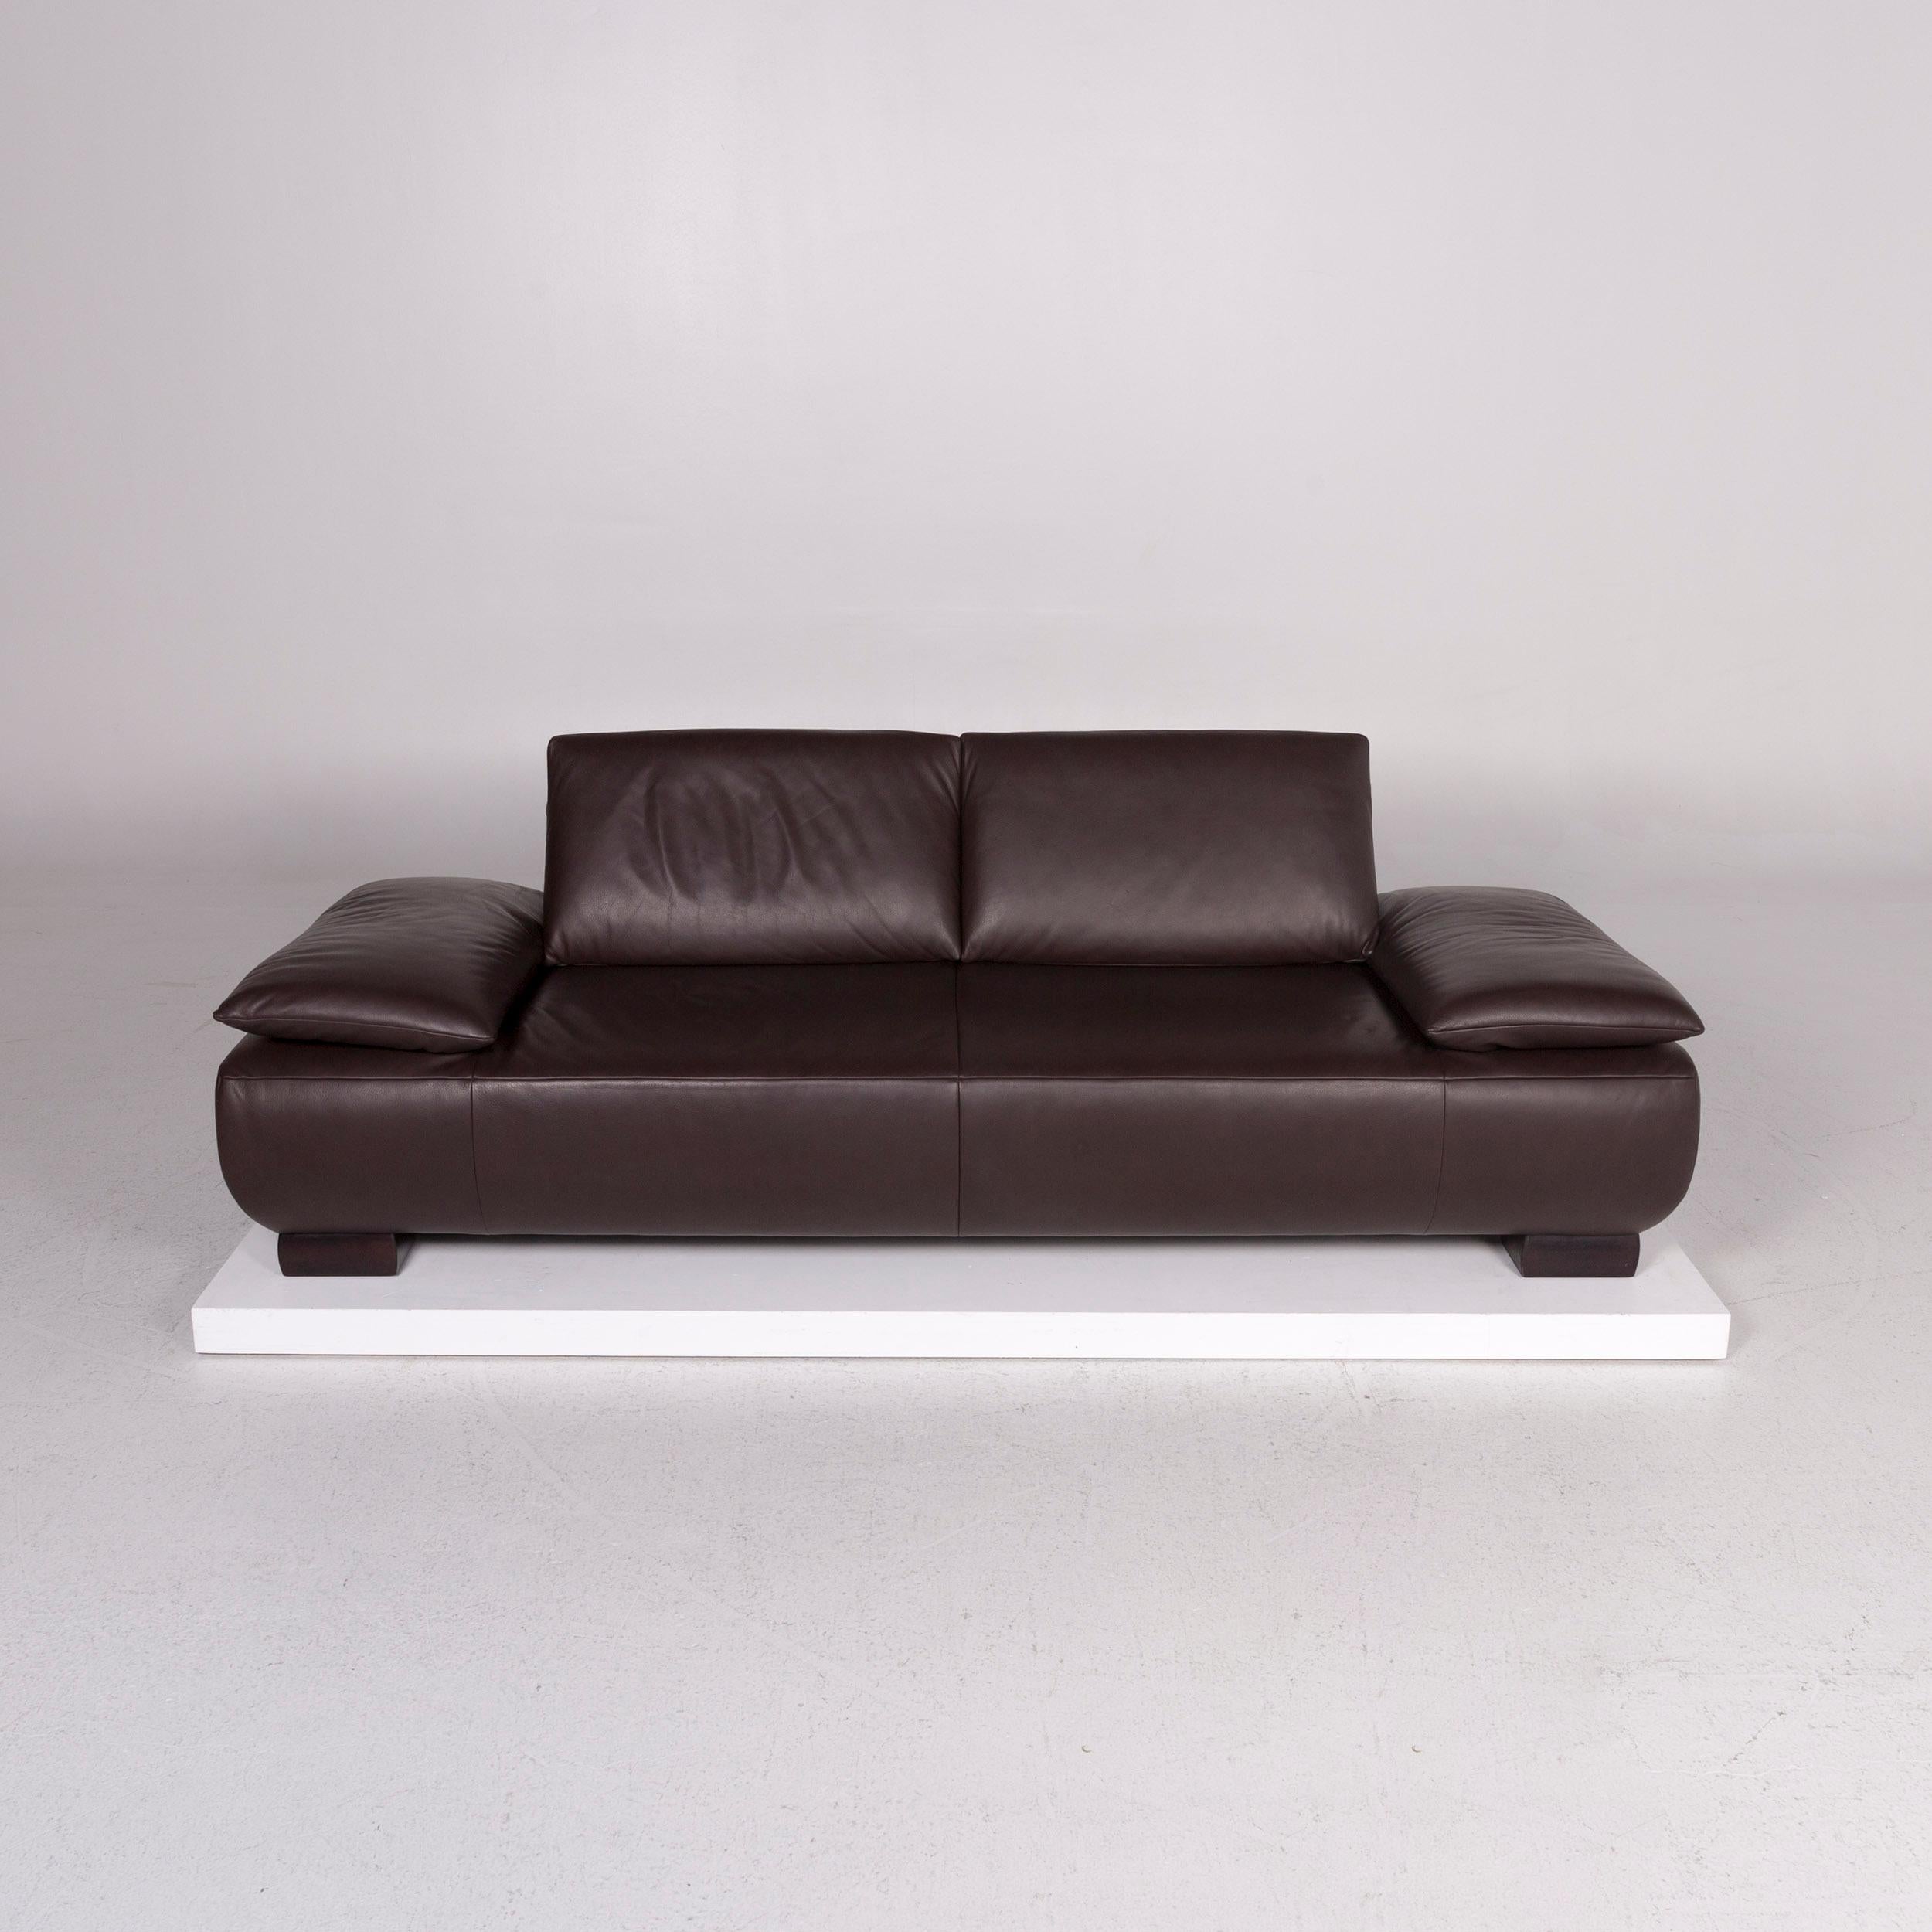 Koinor Volare Leather Sofa Brown Three-Seat Function Couch 2